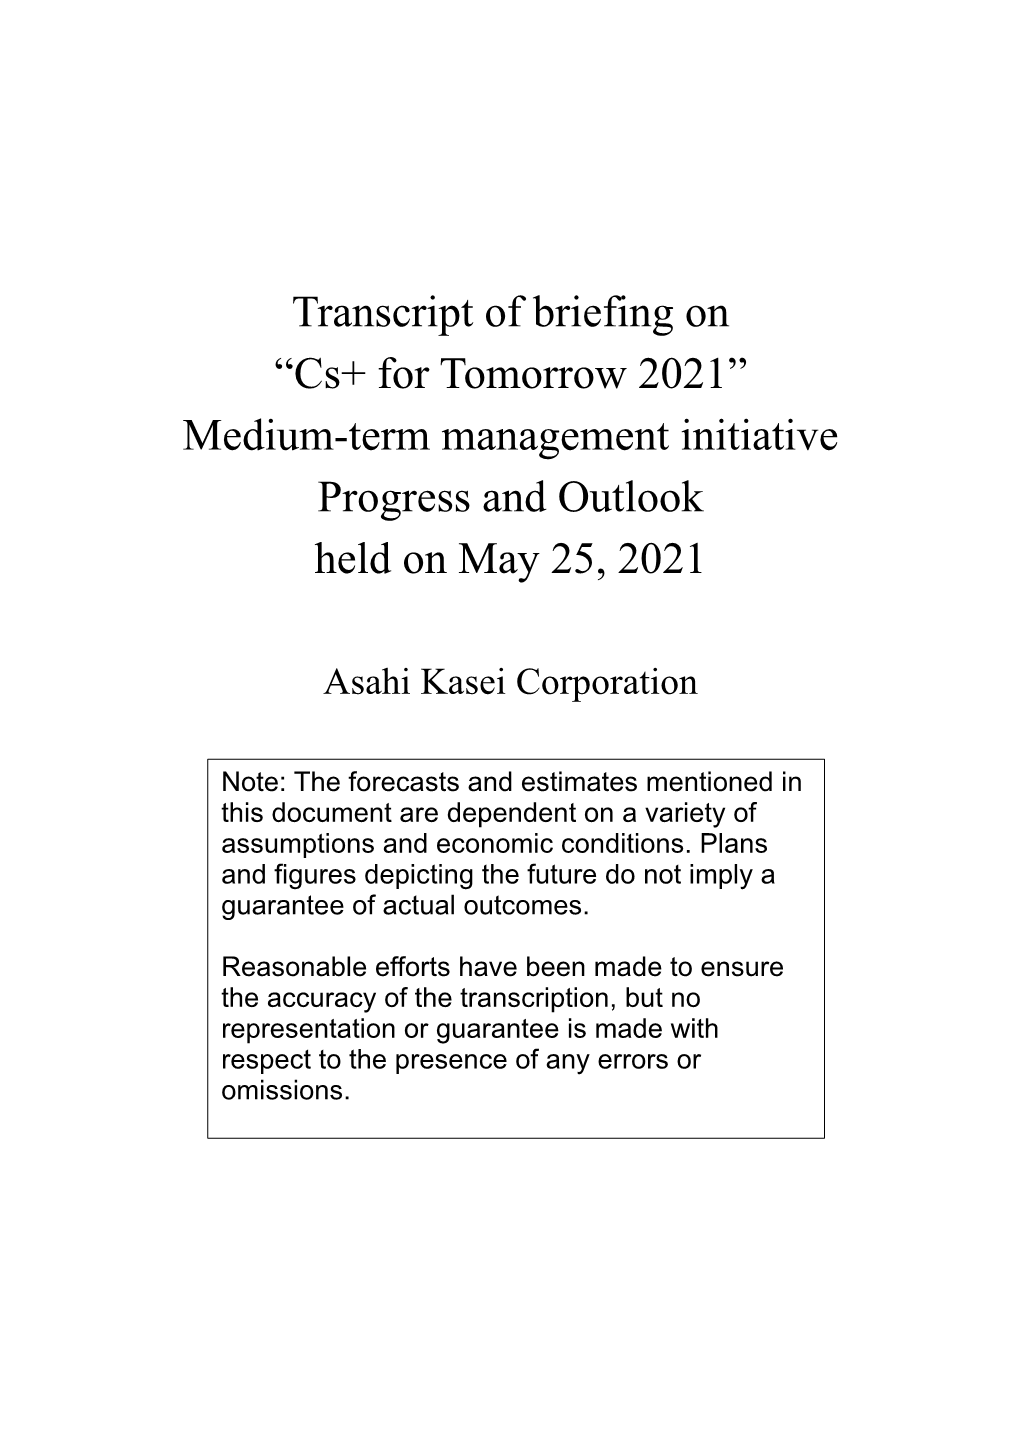 Transcript of Briefing on “Cs+ for Tomorrow 2021” Medium-Term Management Initiative Progress and Outlook Held on May 25, 2021